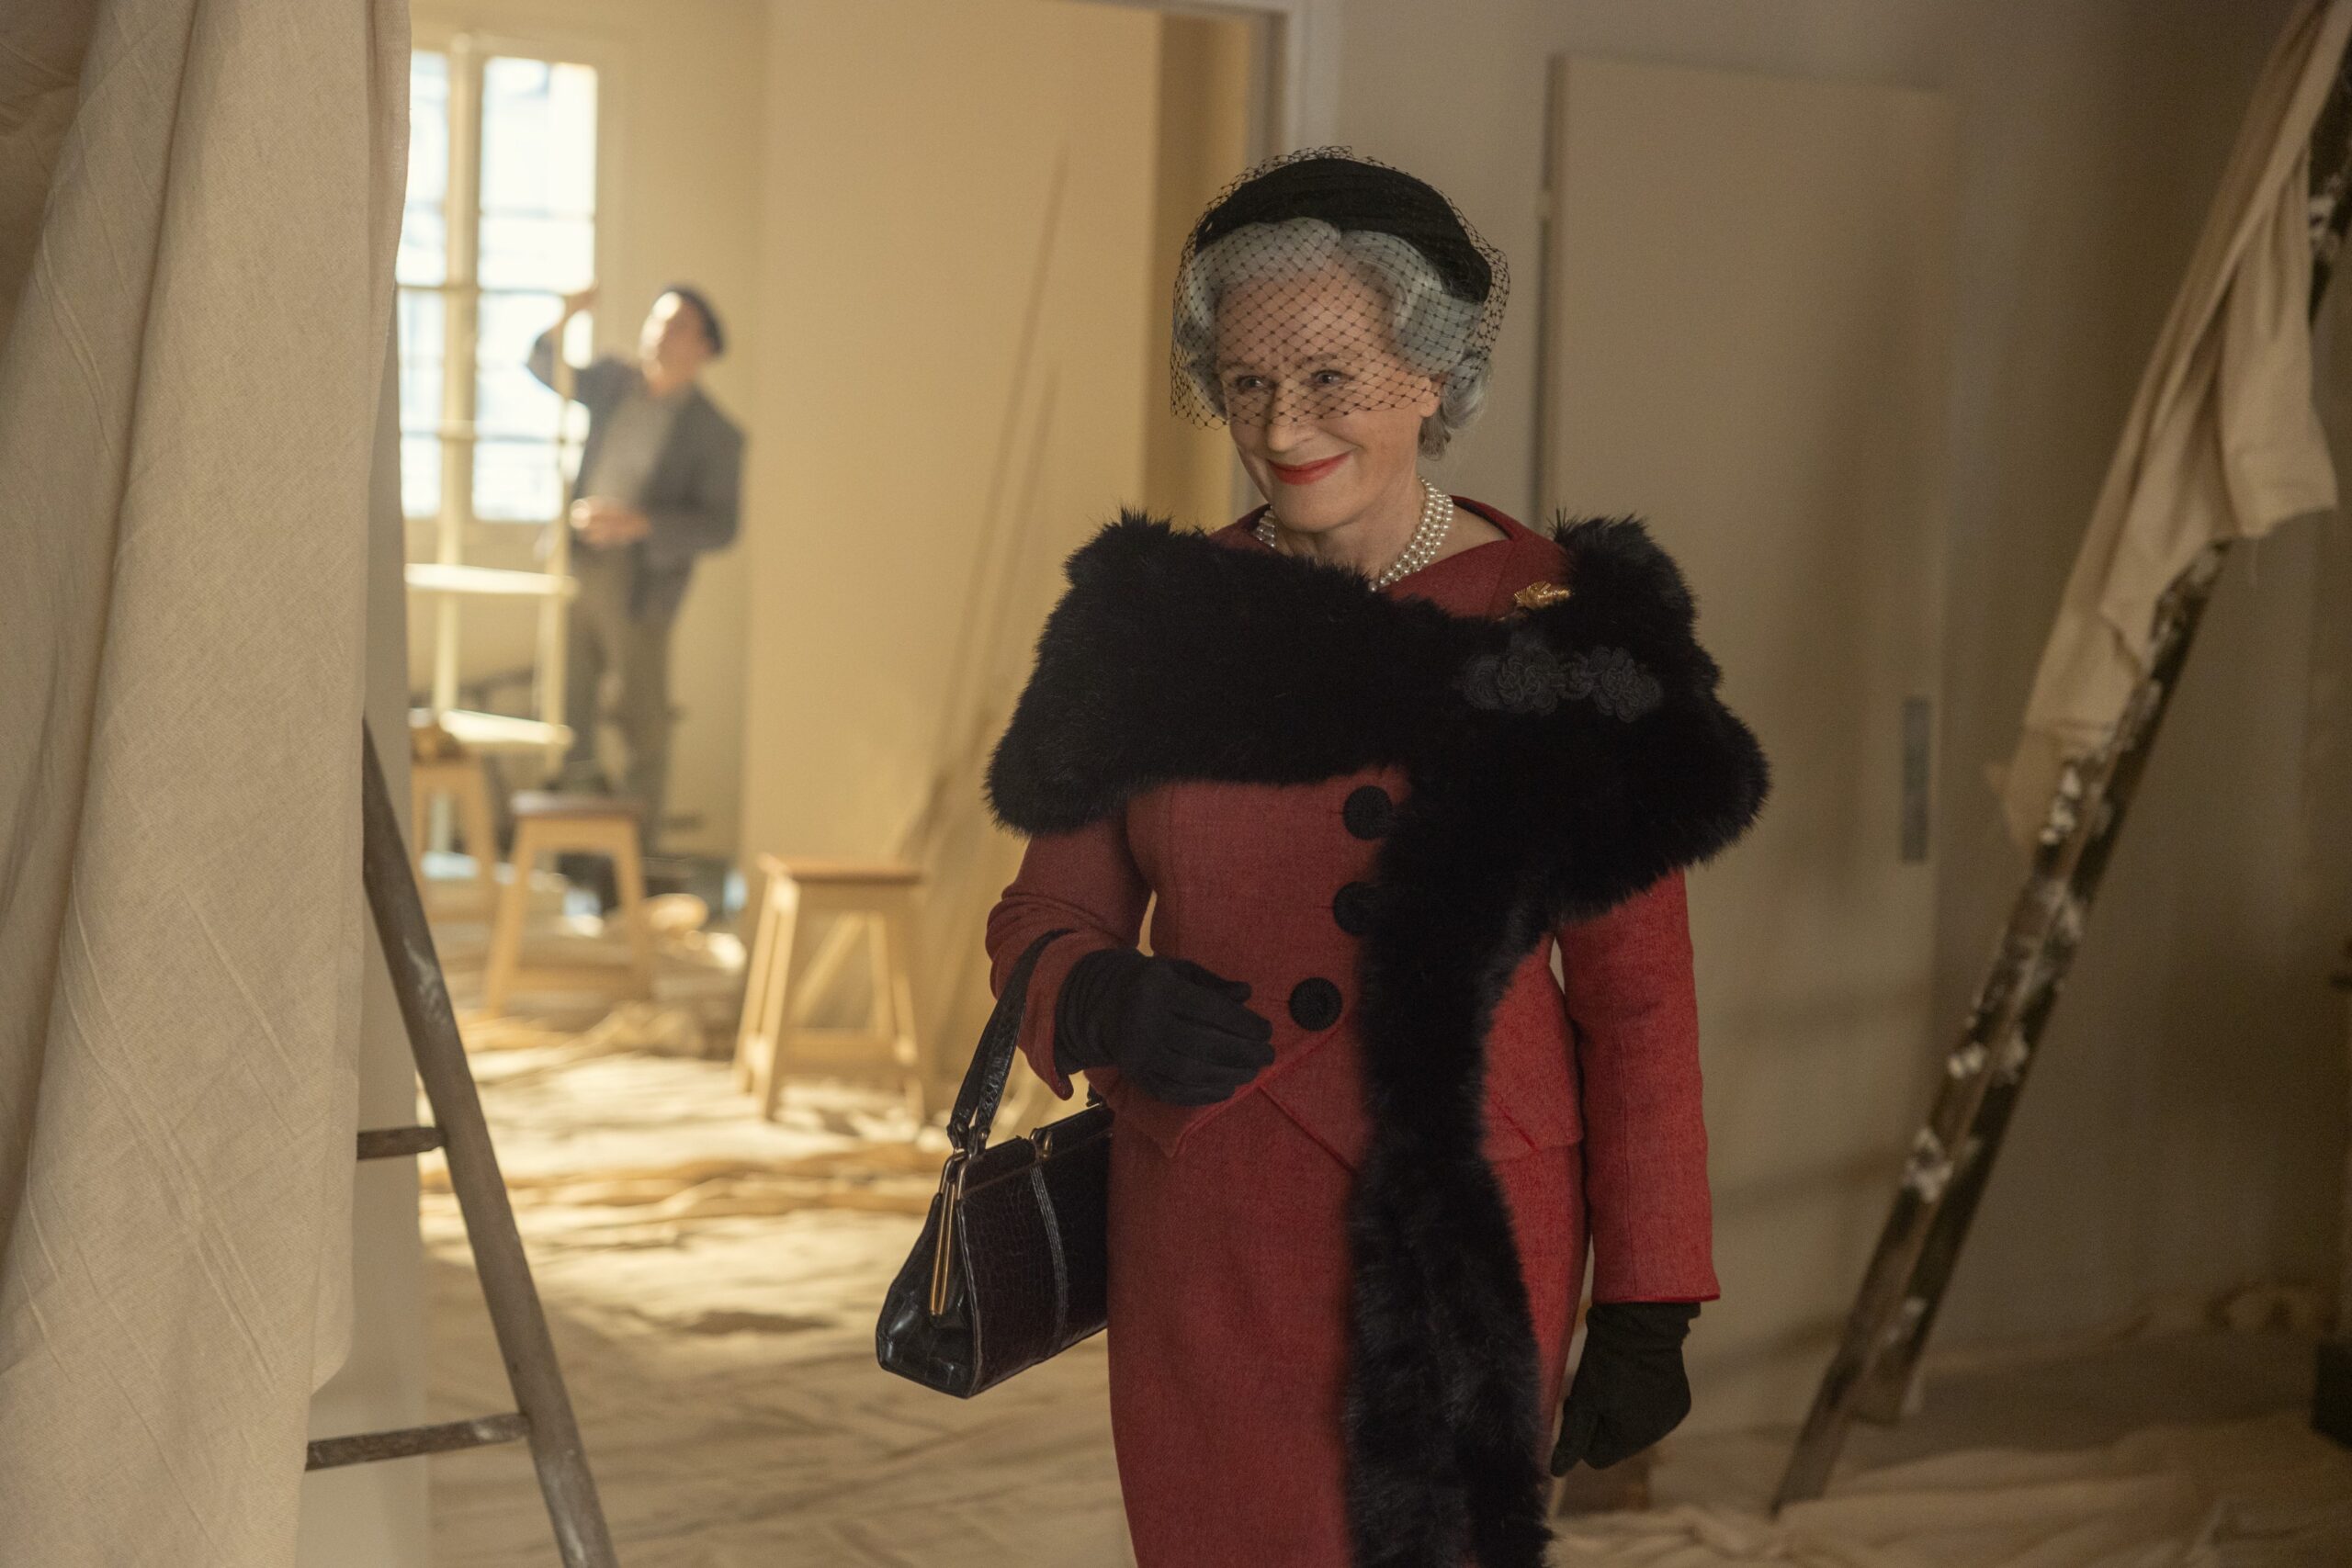 Apple TV+ Shares a First-Look at Glenn Close in Upcoming Drama "The New Look"